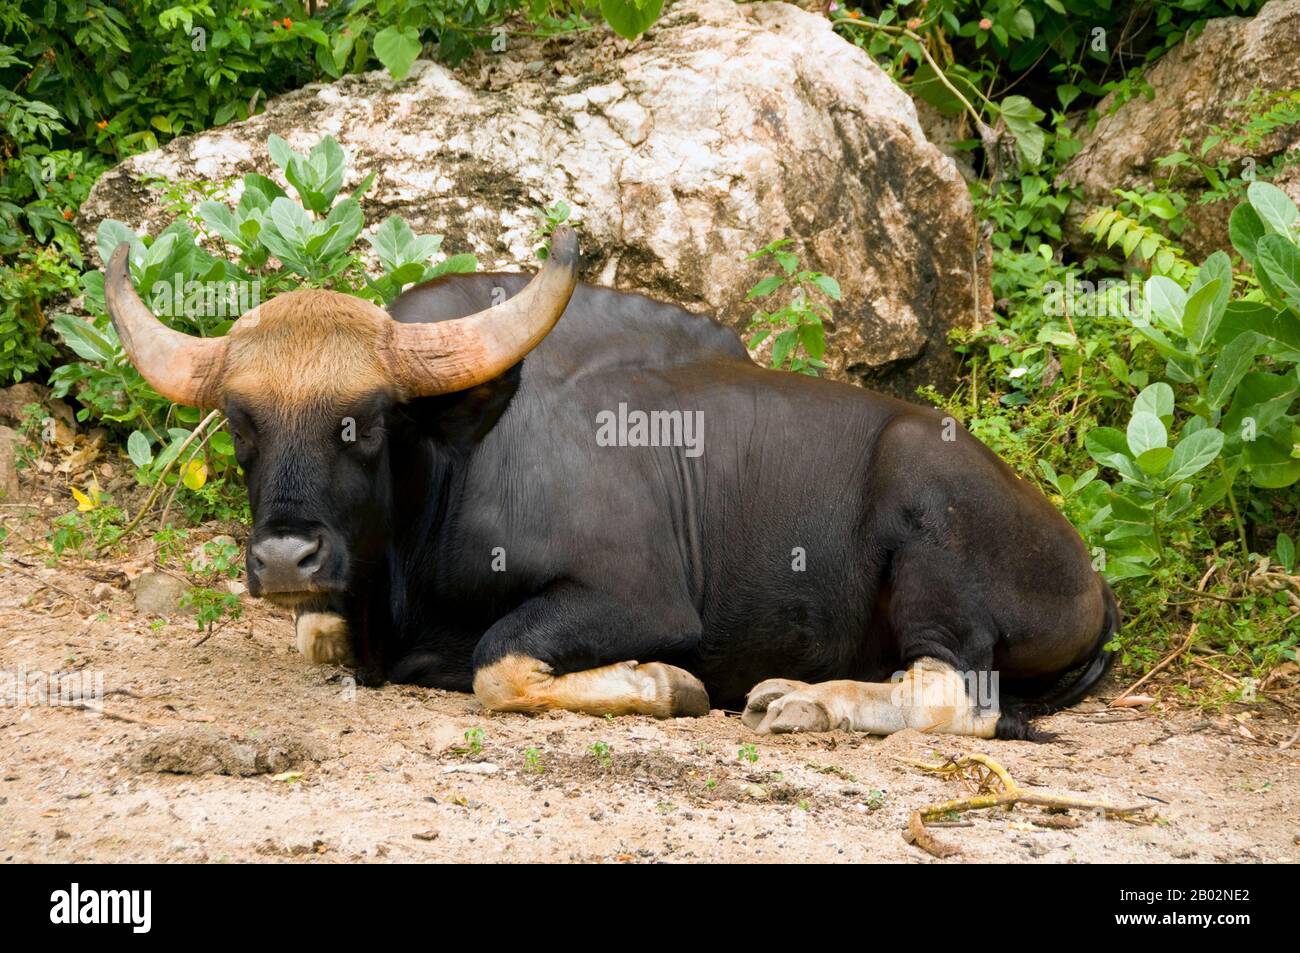 The gaur (Bos gaurus), also called Indian bison, is the largest extant bovine and is native to South Asia and Southeast Asia. The species is listed as vulnerable on the IUCN Red List since 1986, as the population decline in parts of the species' range is likely to be well over 70% during the last three generations. Population trends are stable in well-protected areas, and are rebuilding in a few areas which had been neglected.  The gaur is the tallest species of wild cattle. The Malayan gaur is called seladang, and the Burmese gaur is called pyoung. Stock Photo